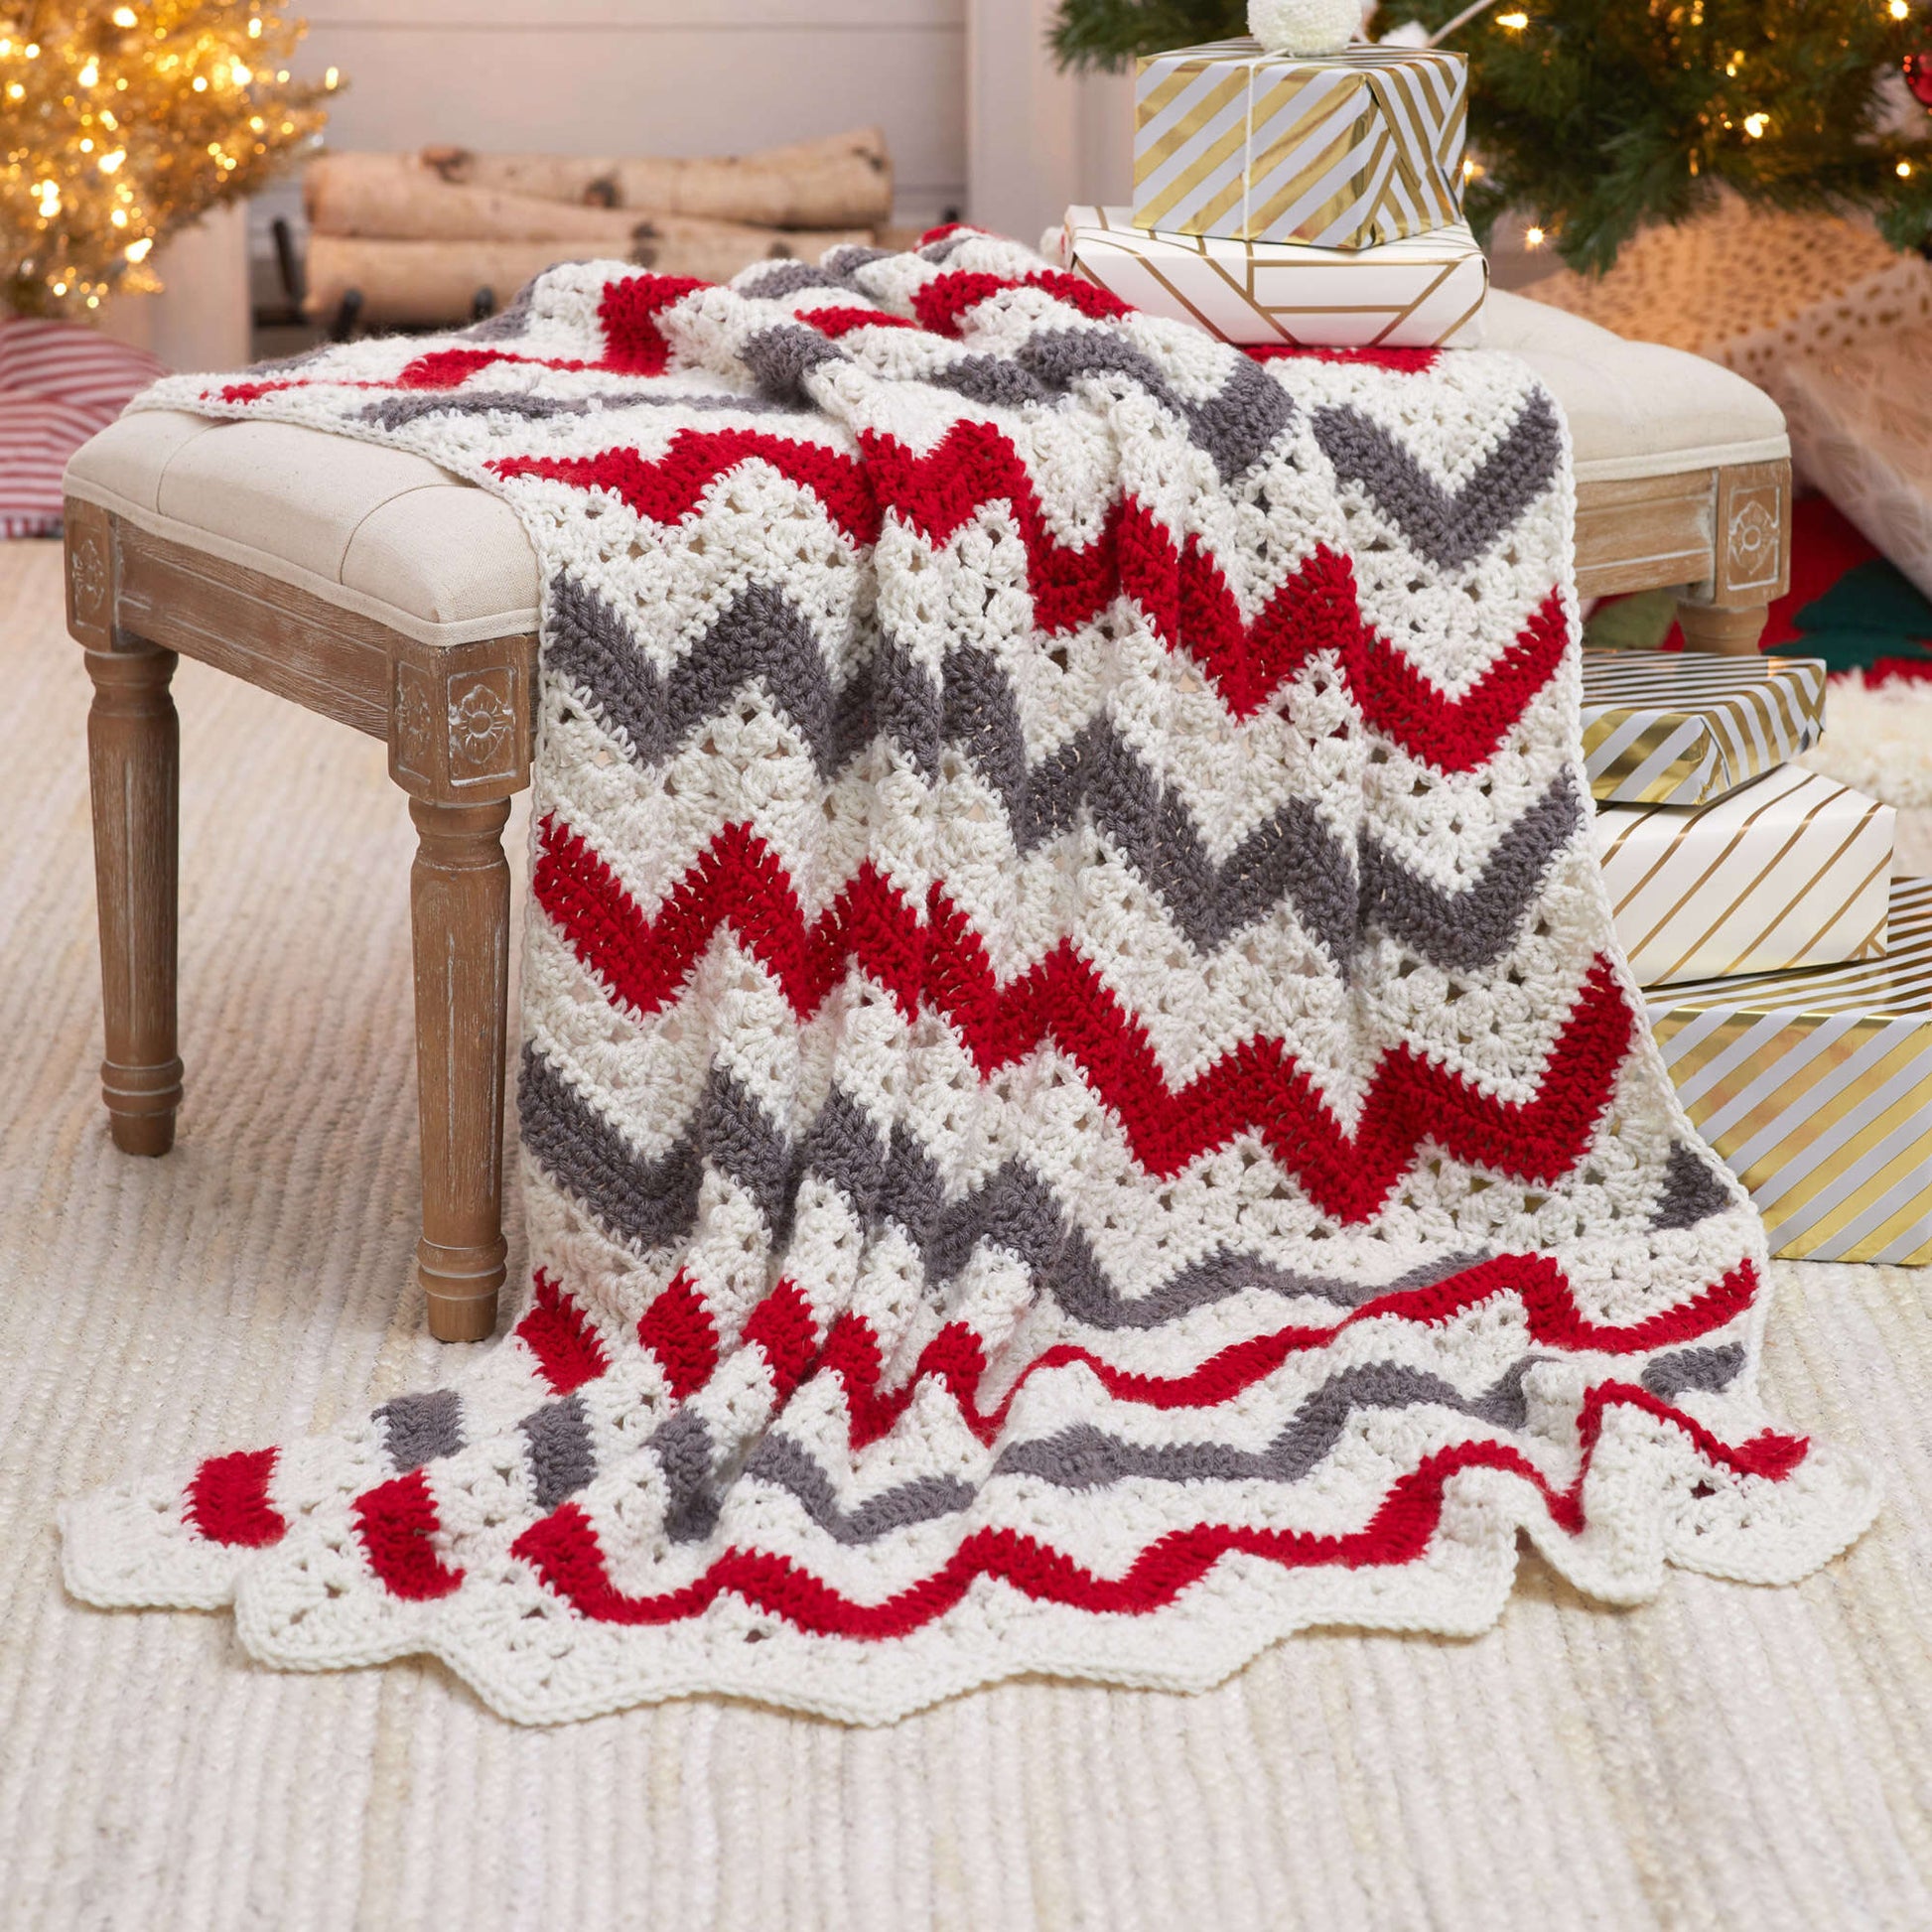 Free Red Heart Holiday Ripple Throw ( designer dispute, pattern taken down as per ally's note ) Crochet Pattern